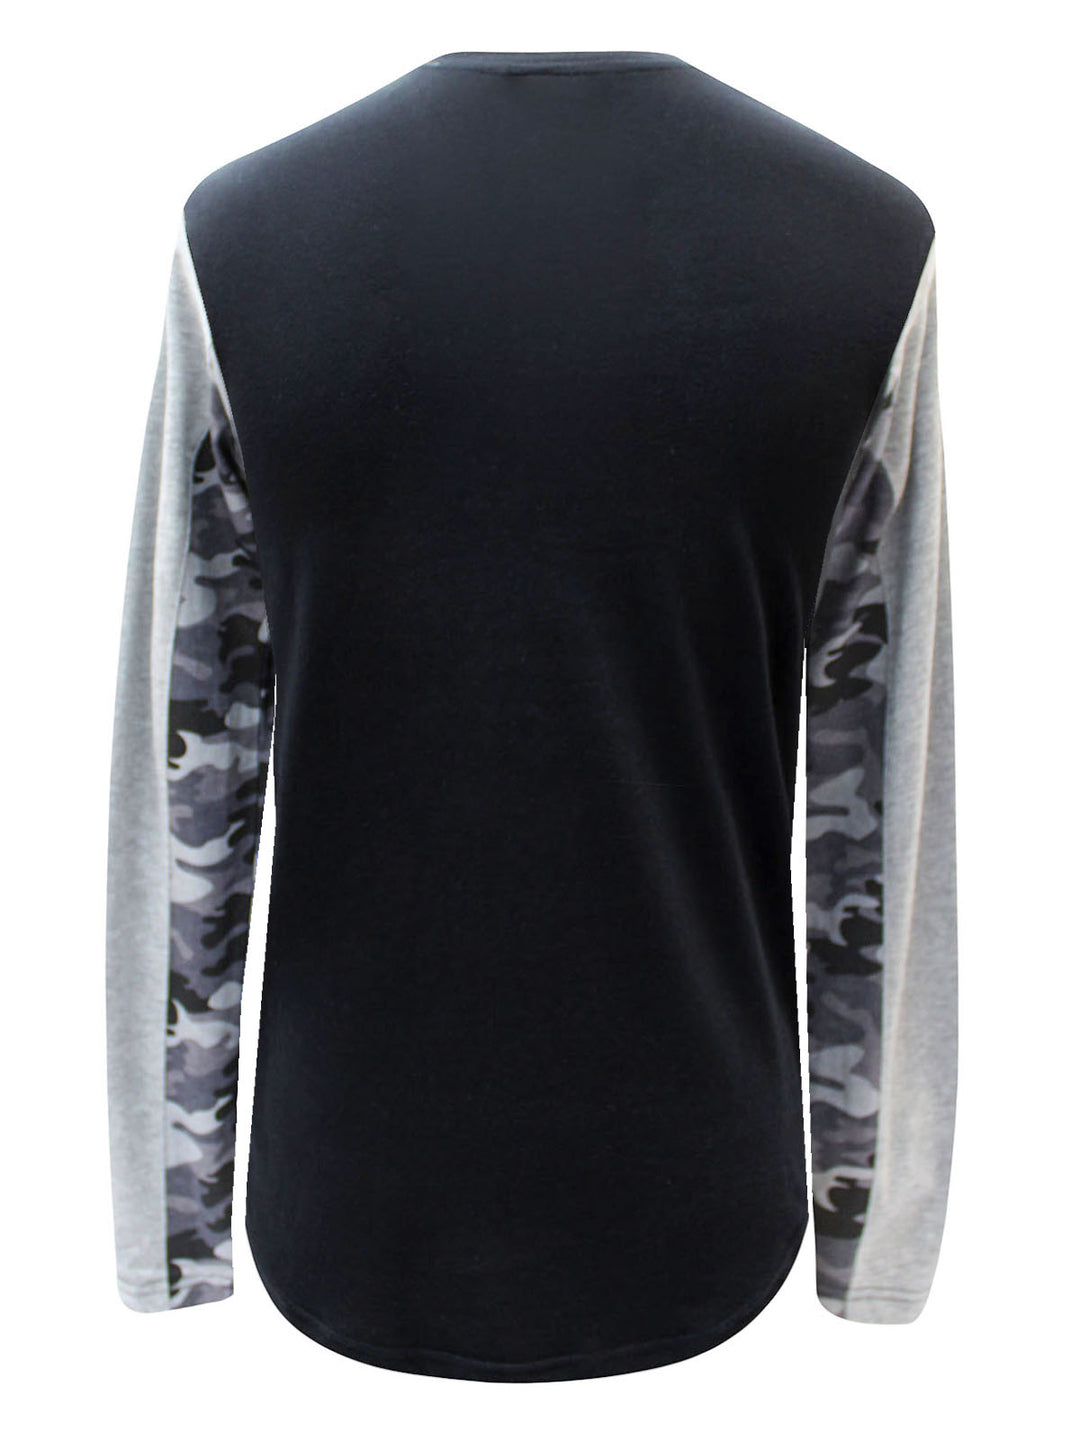 Men's Camo Long Sleeve T-Shirt with Fringes